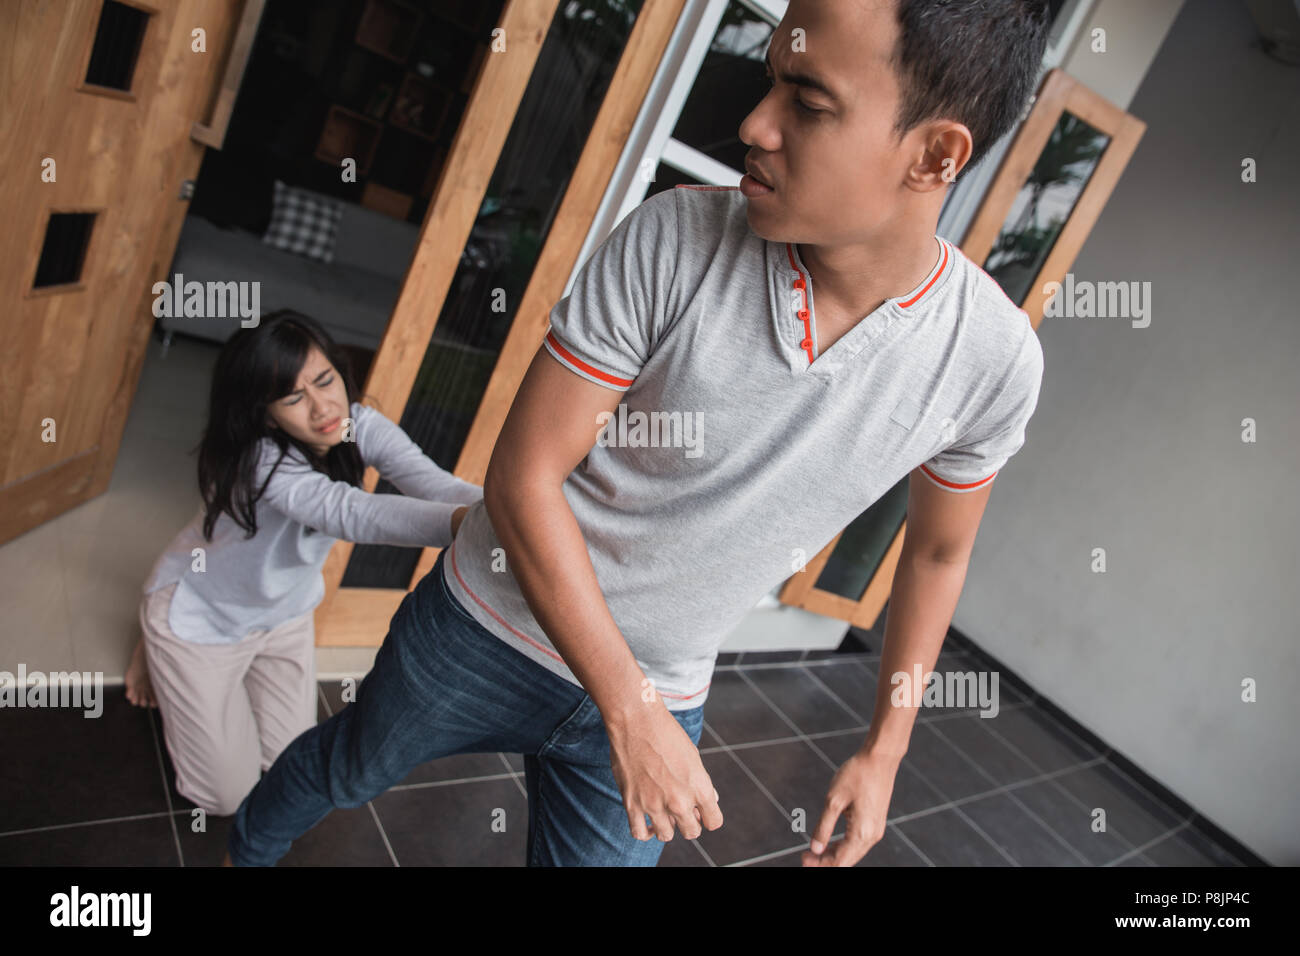 girl try to stop her boy friend to go during the fight. couple ...